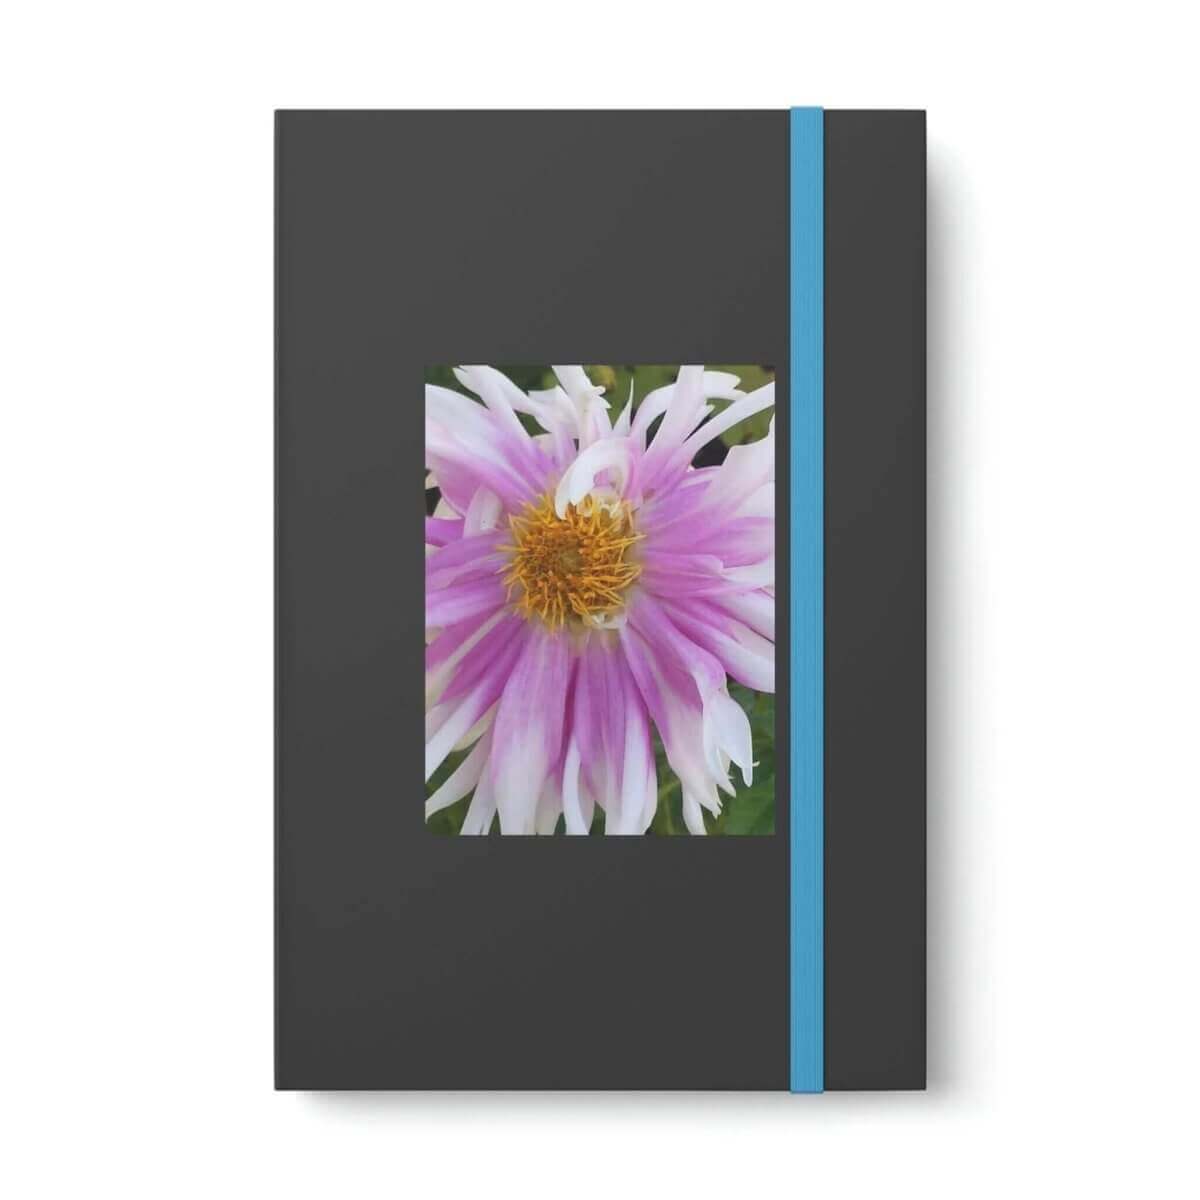 Dahlia Bloom - Color Contrast Notebook - Ruled - 2